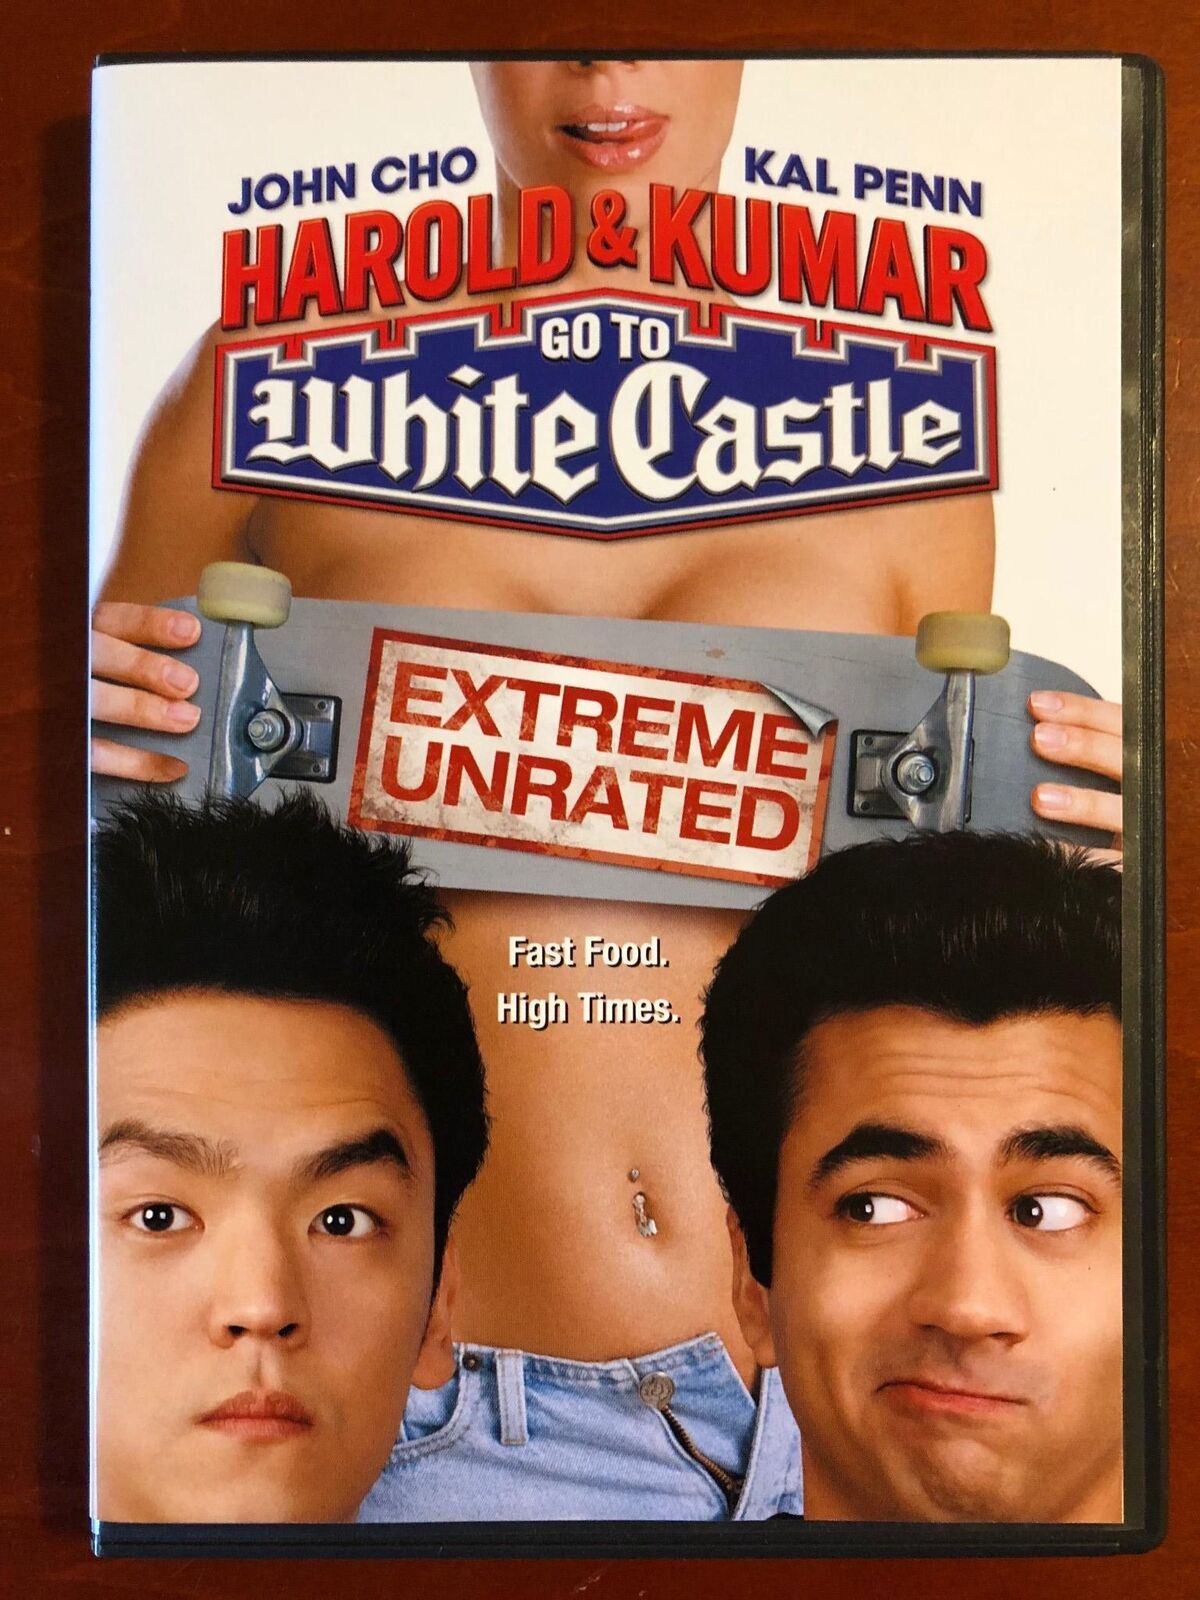 Harold and Kumar Go To White Castle (DVD, 2004, Extreme Unrated) - J0514